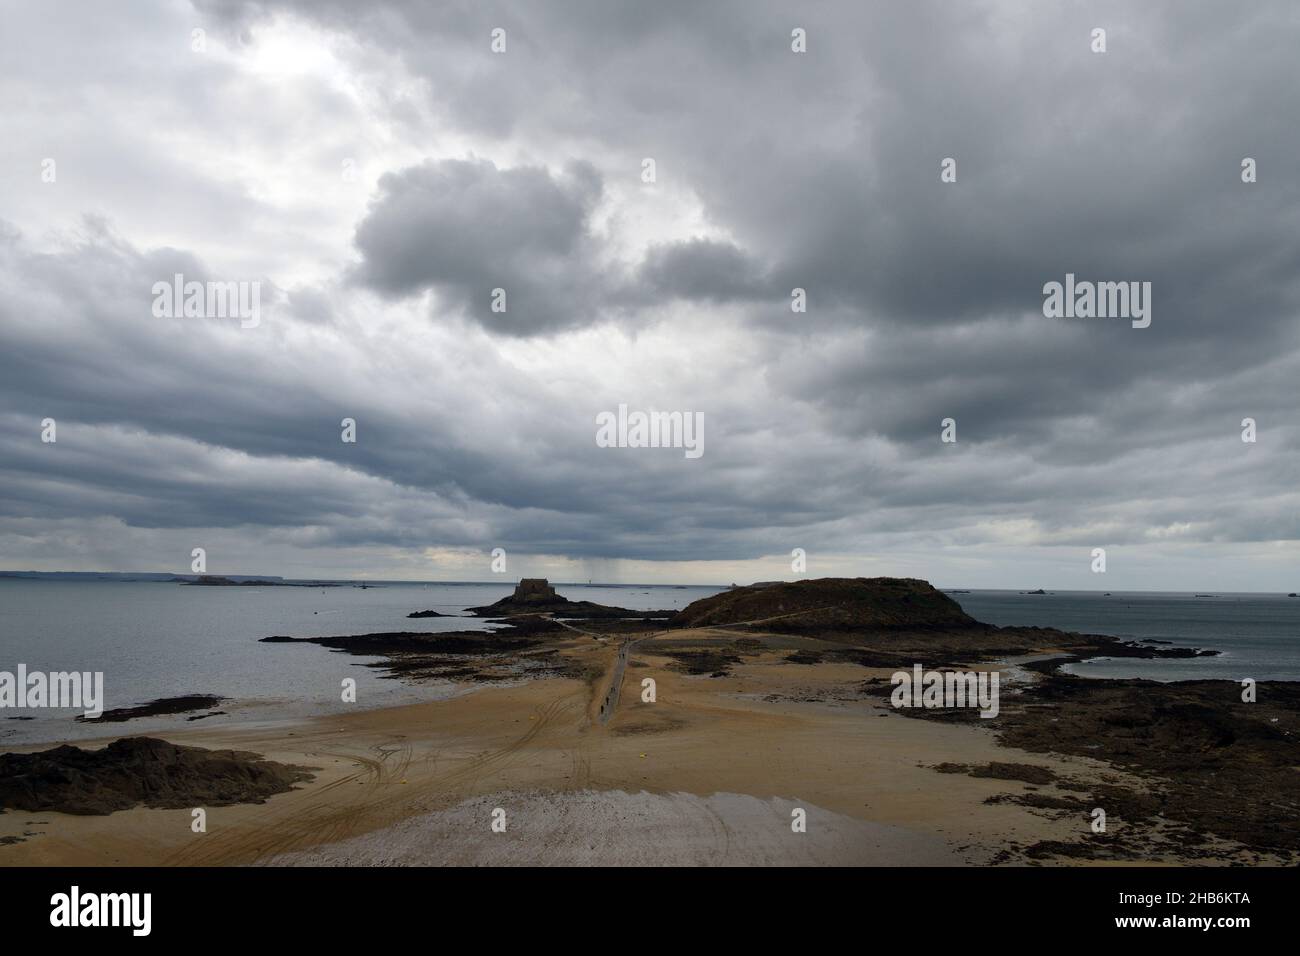 view from Saint-Malo to the island of Grand Be, France, Brittany, Département Ille-et-Vilaine, Saint-Malo Stock Photo